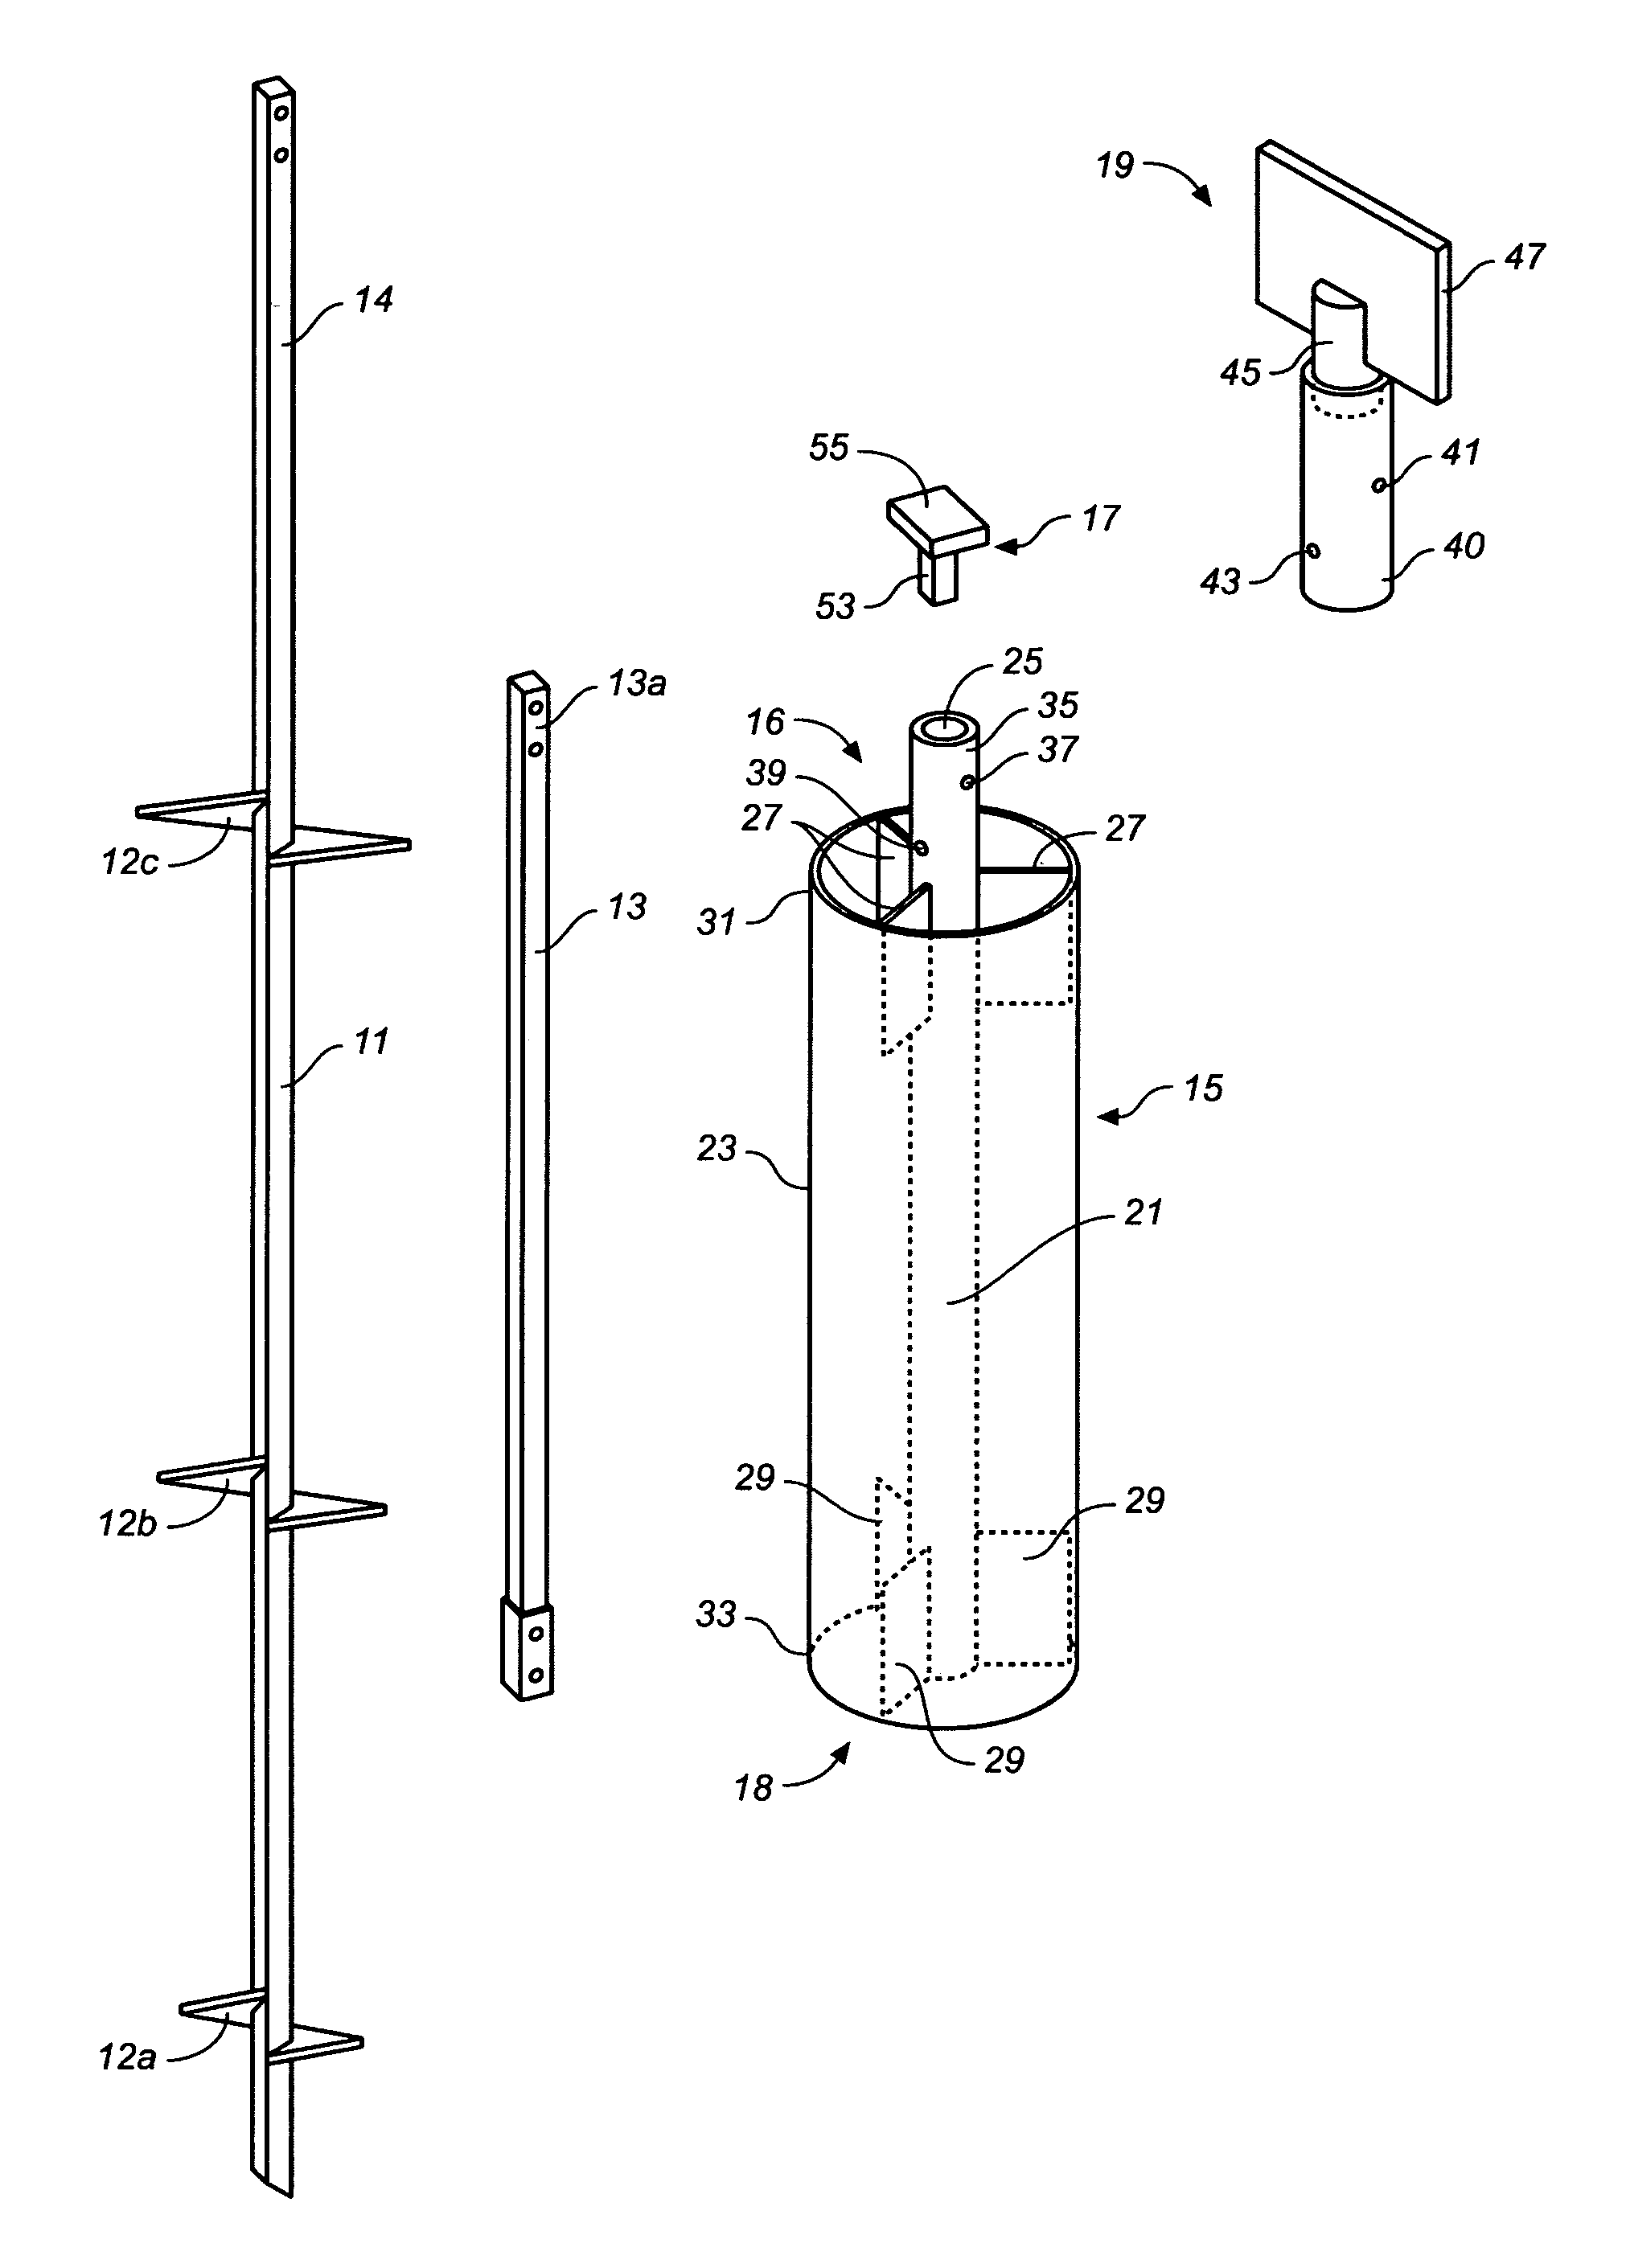 Lateral force resistance device